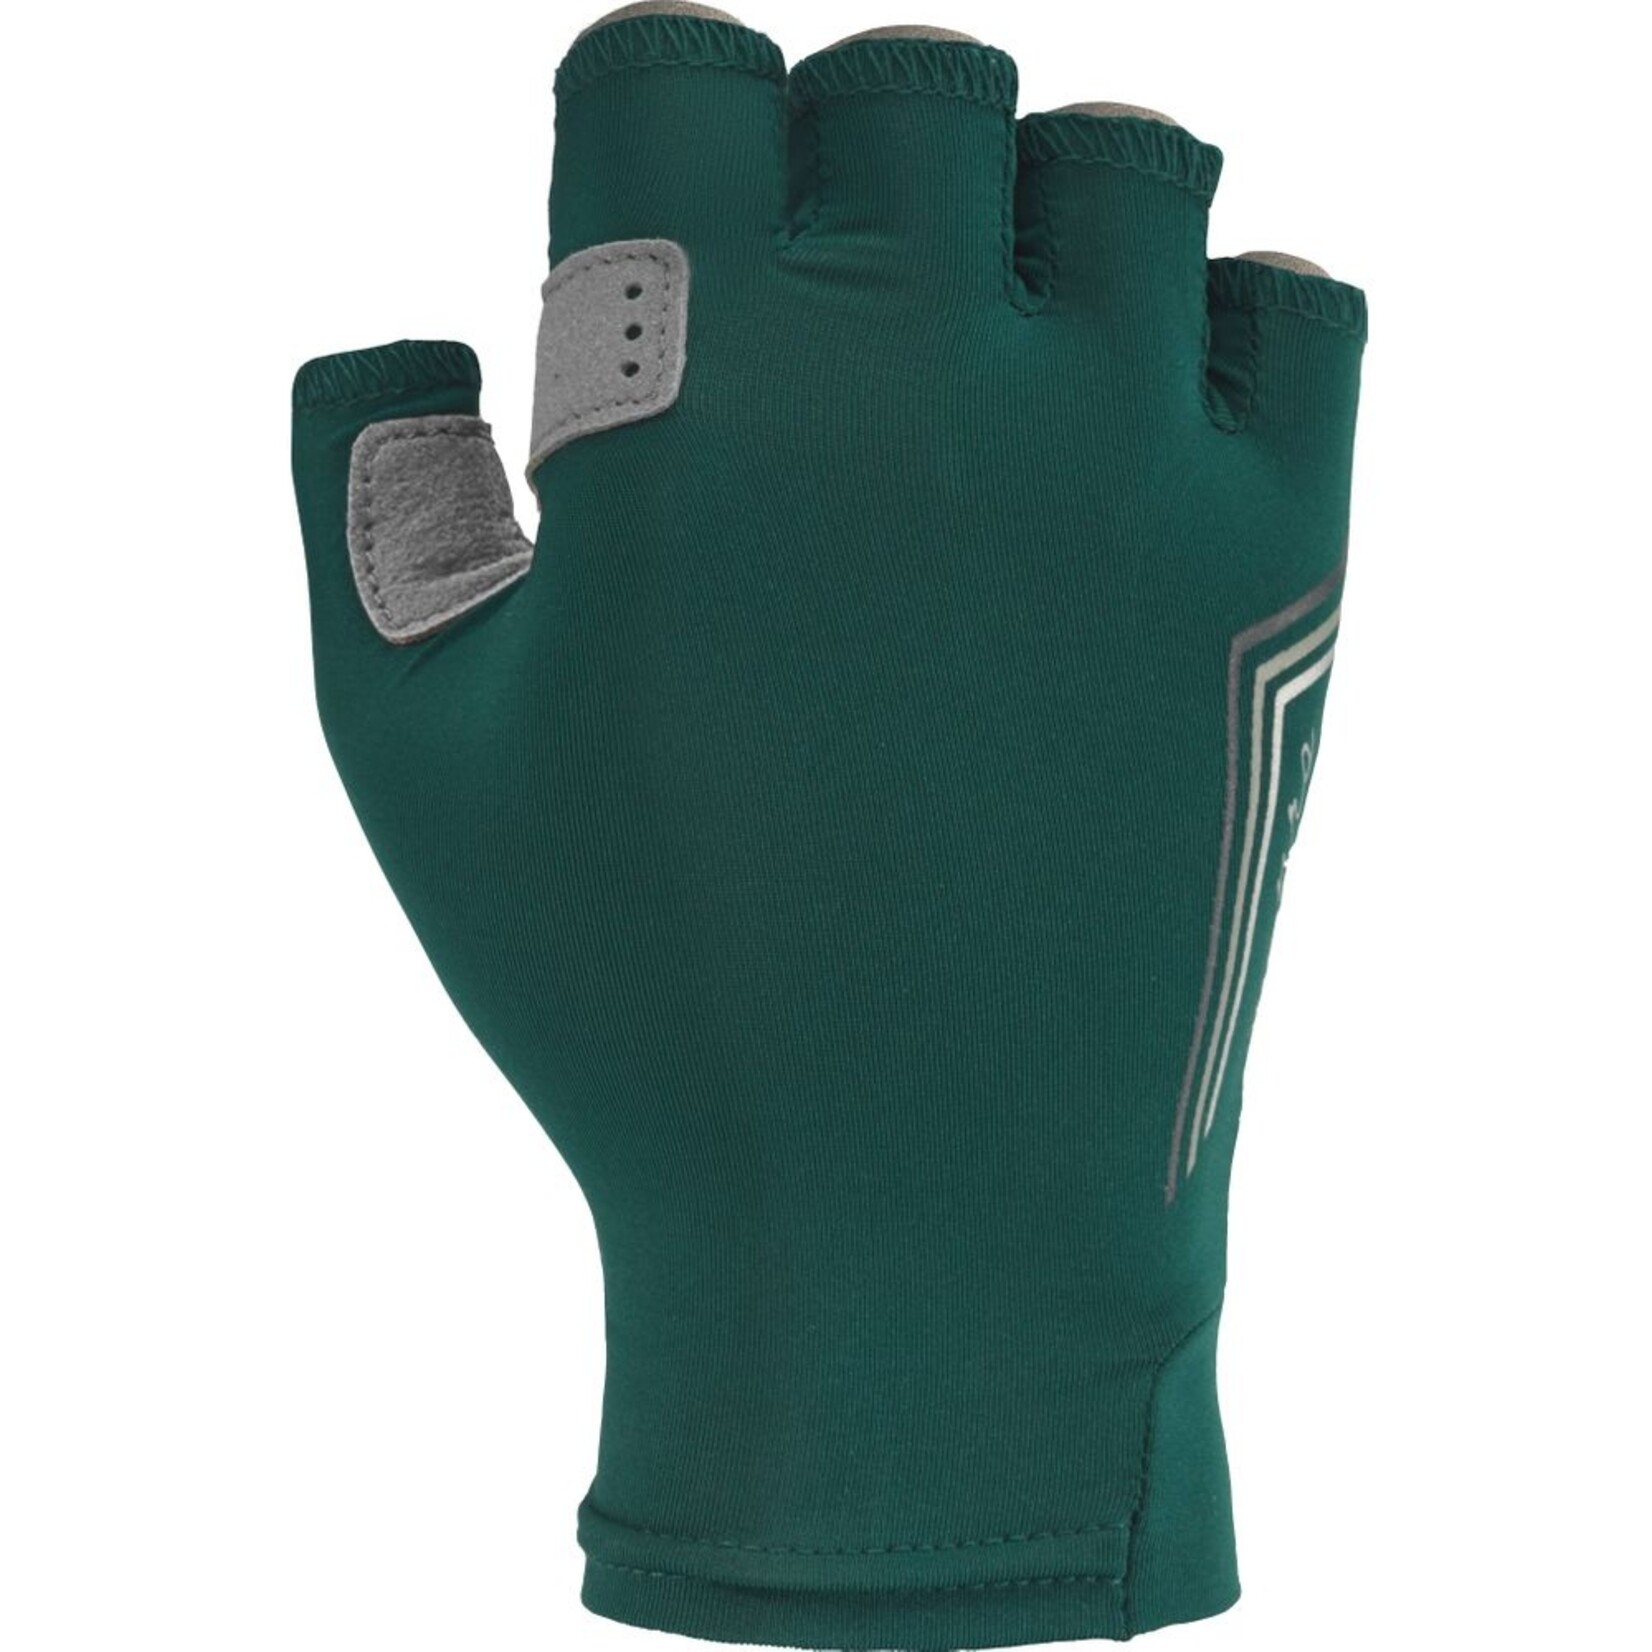 NRS, Inc NRS Women's Boater's Gloves